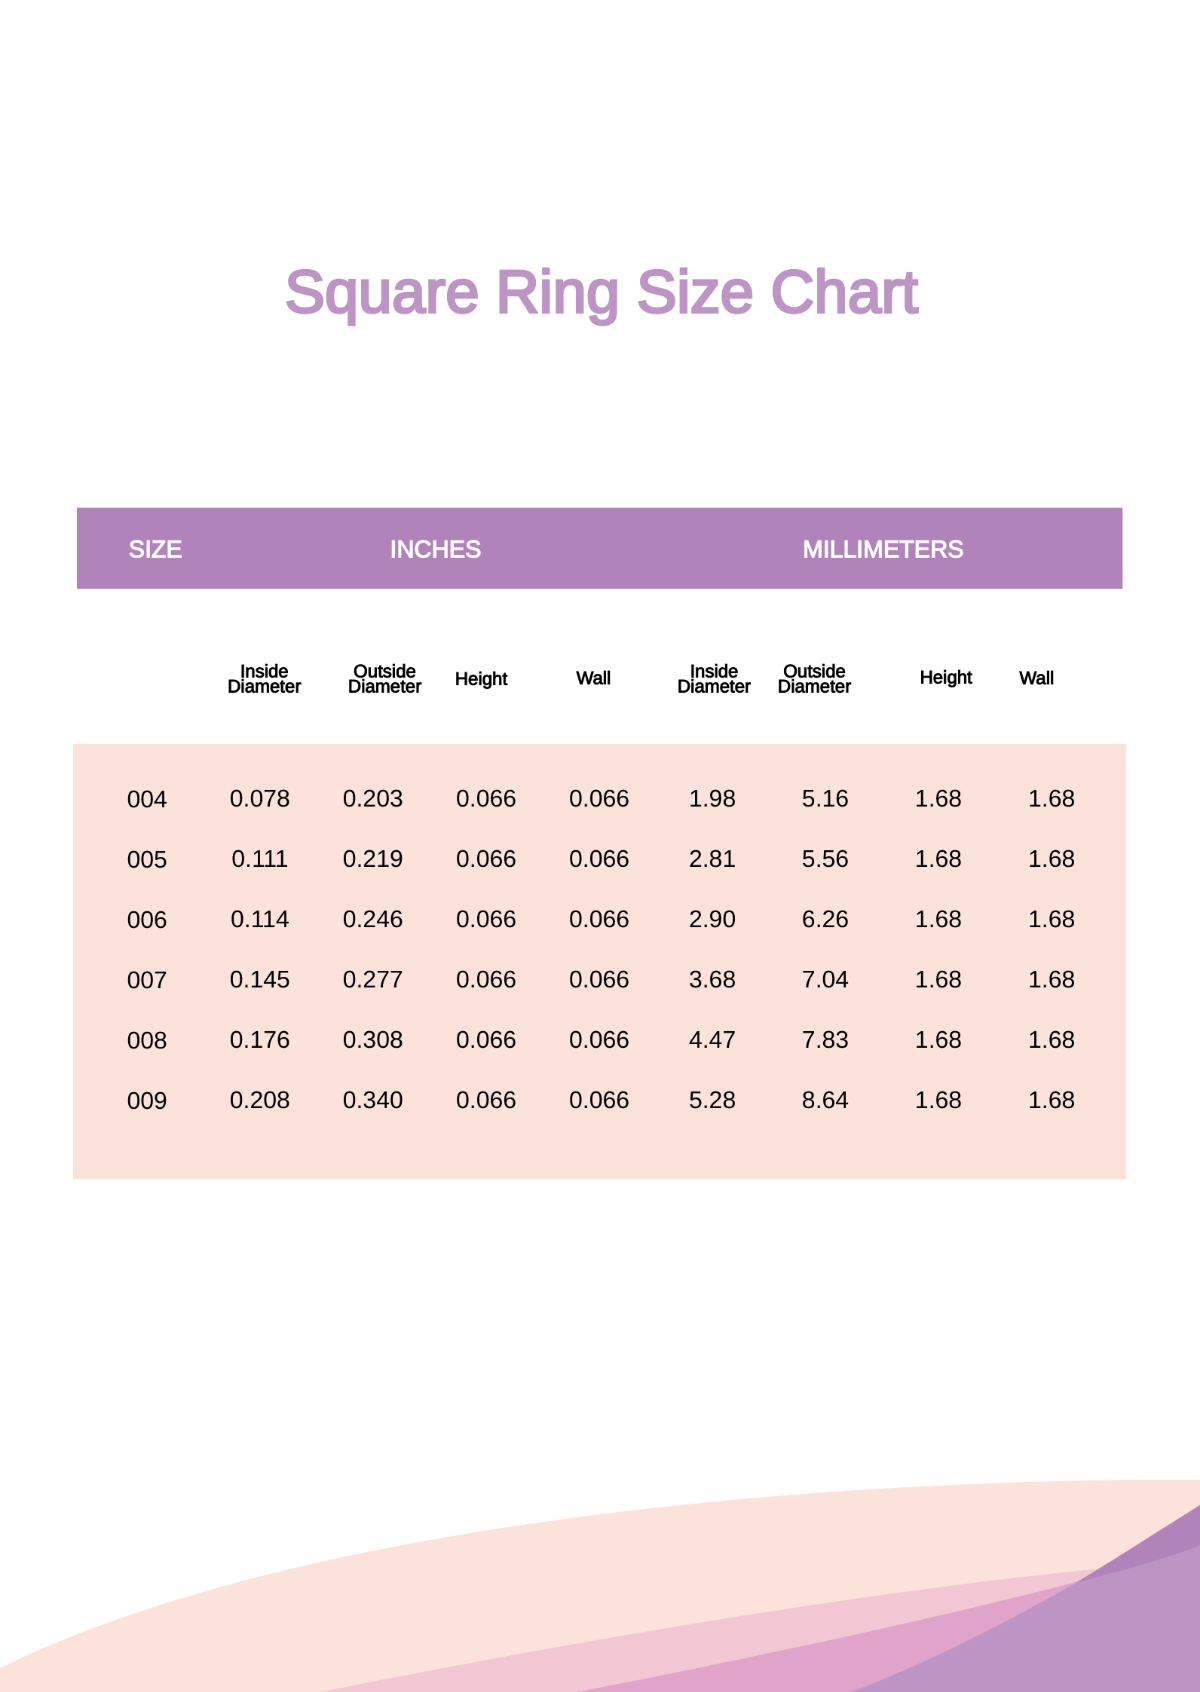 Square Ring Size Chart Template